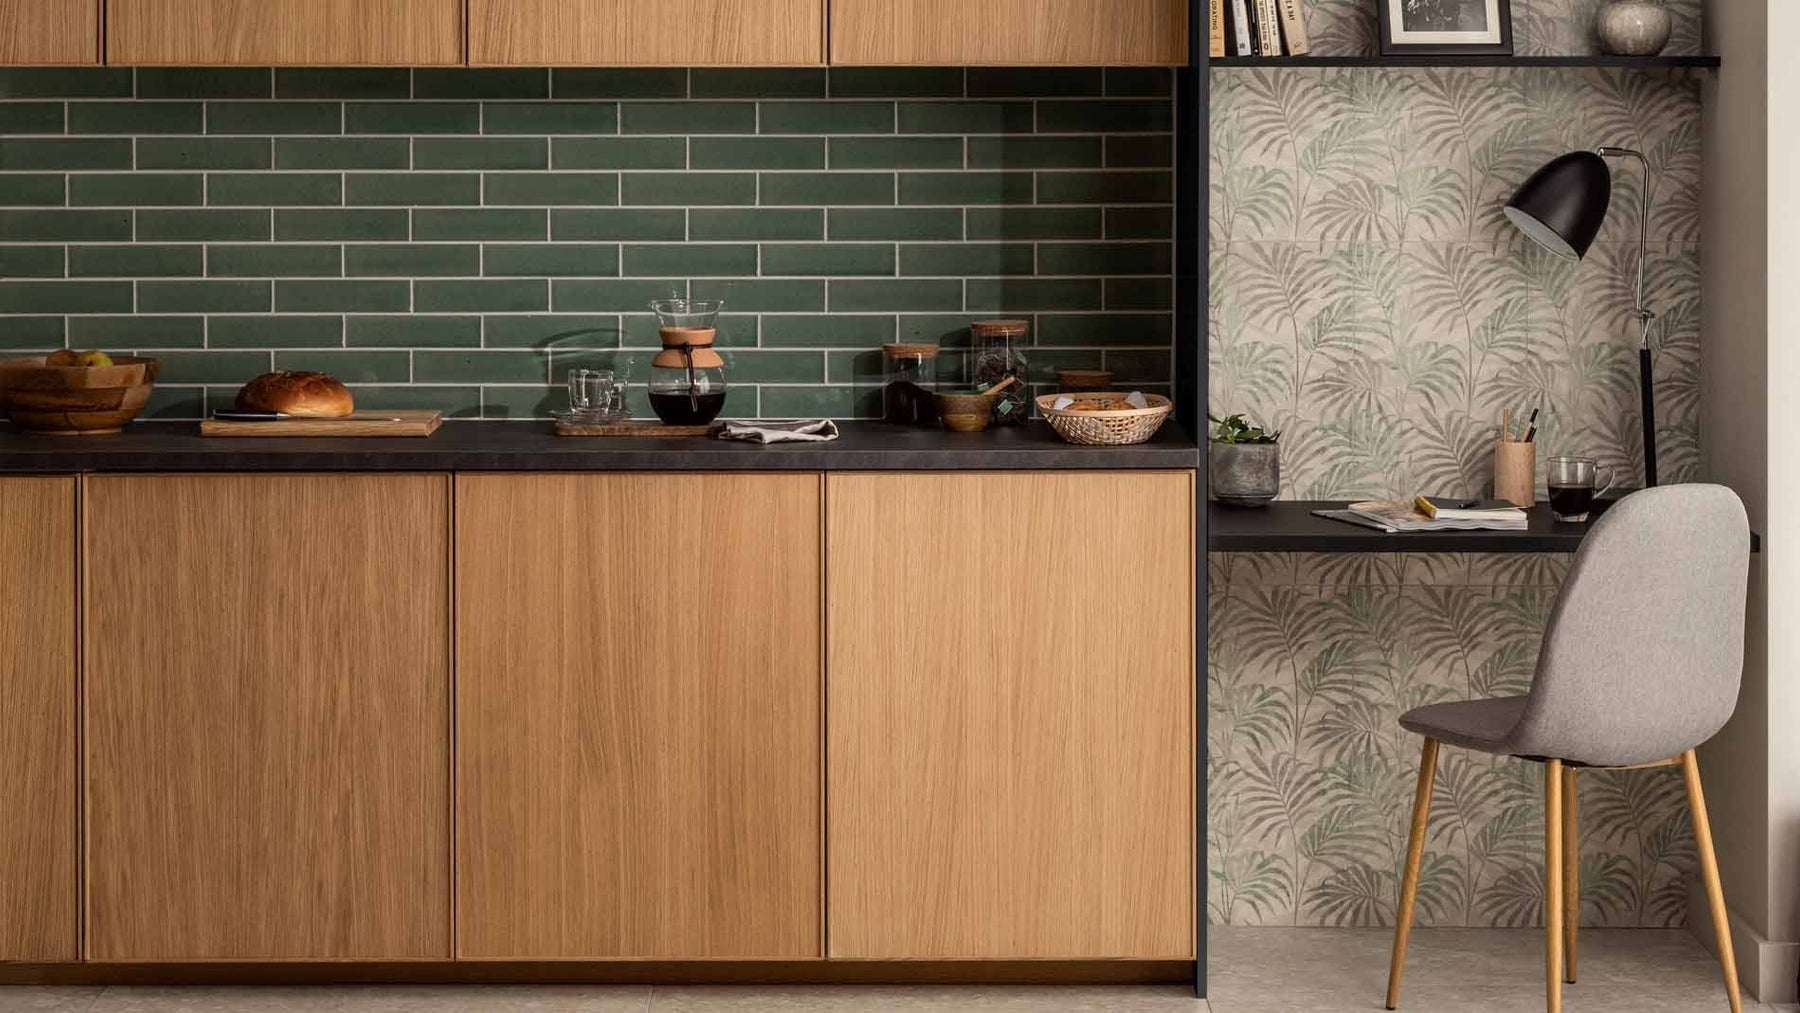 green kitchen tile with wooden cupboards and work space